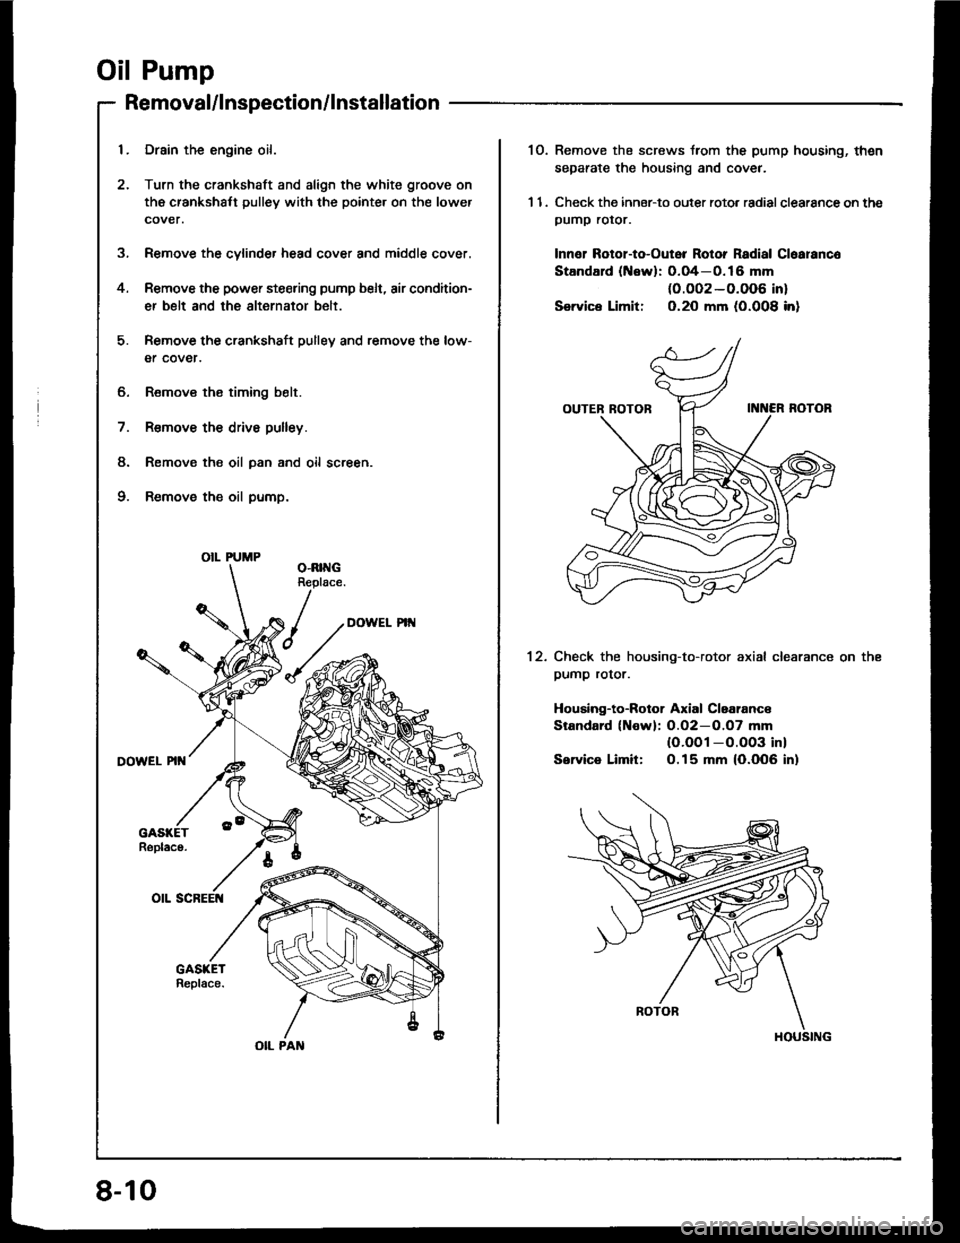 ACURA INTEGRA 1994  Service Repair Manual Oil Pump
5.
4.
Removal/lnspection/lnstallation
6. Remov€ the timing belt.
7. R€move the drive pulley.
8. Remov€ the oil pan and oil screen.
9. Remove the oil pump.
Drain the engine oil.
Turn the